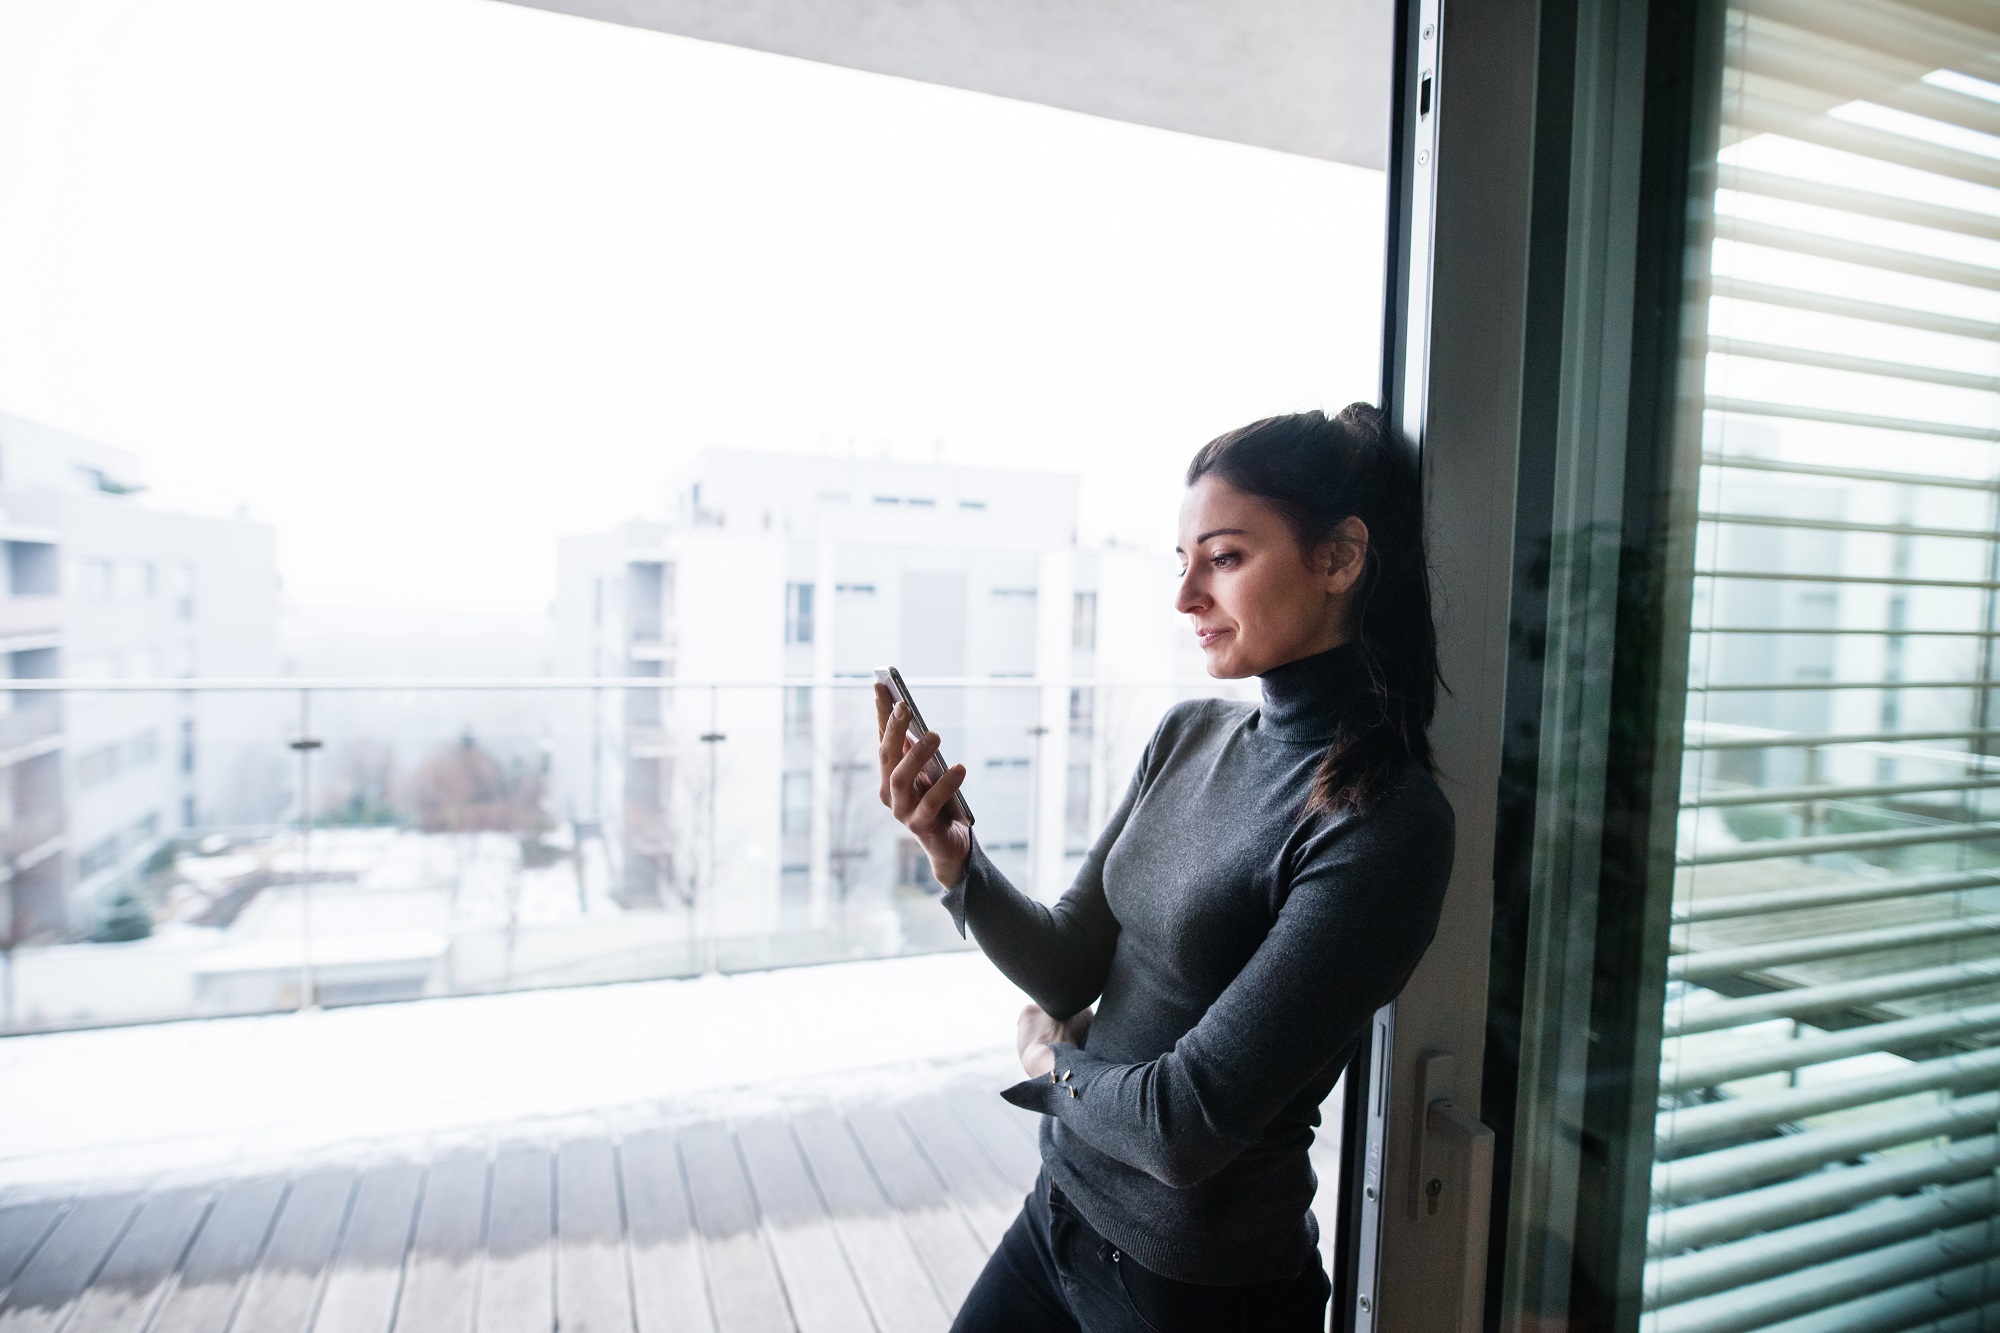 A woman standing by the window, holding smartphone.